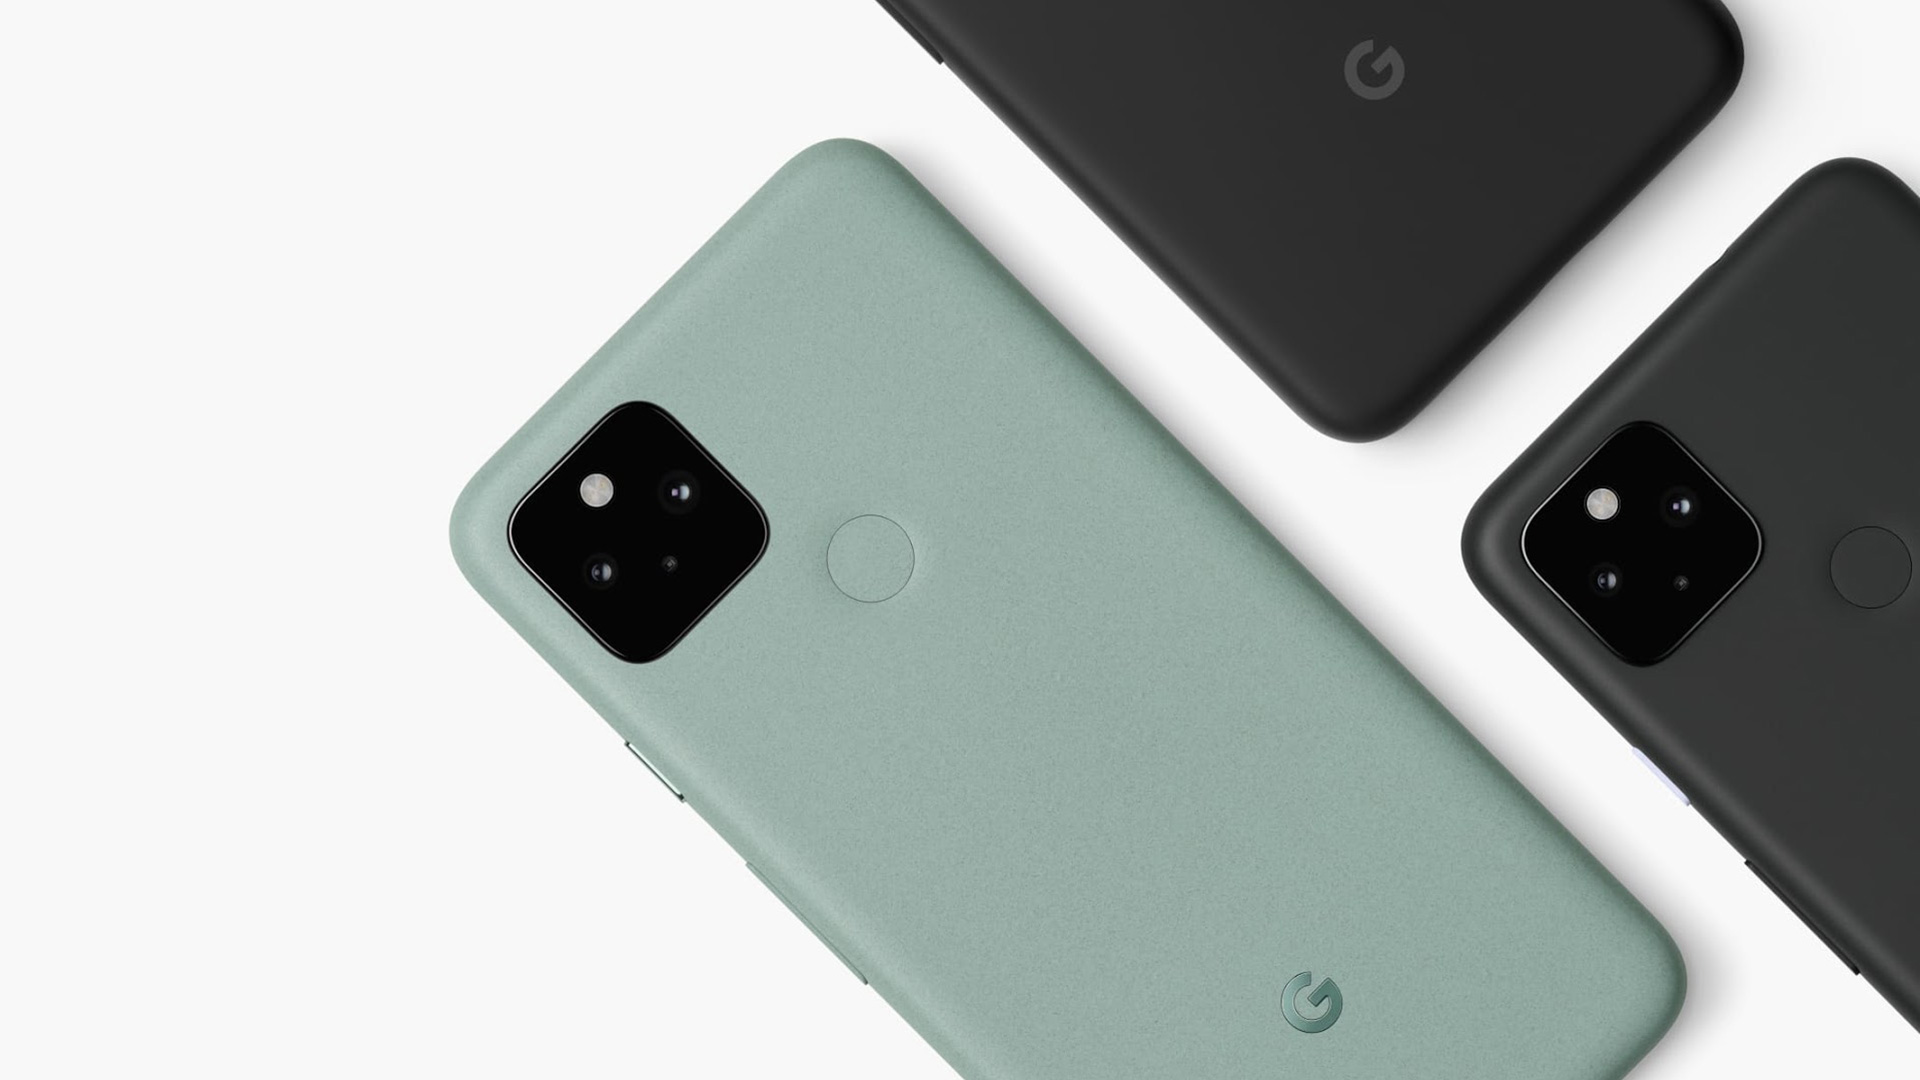 The Pixel 5's Extreme Battery Saver is coming to older Google 